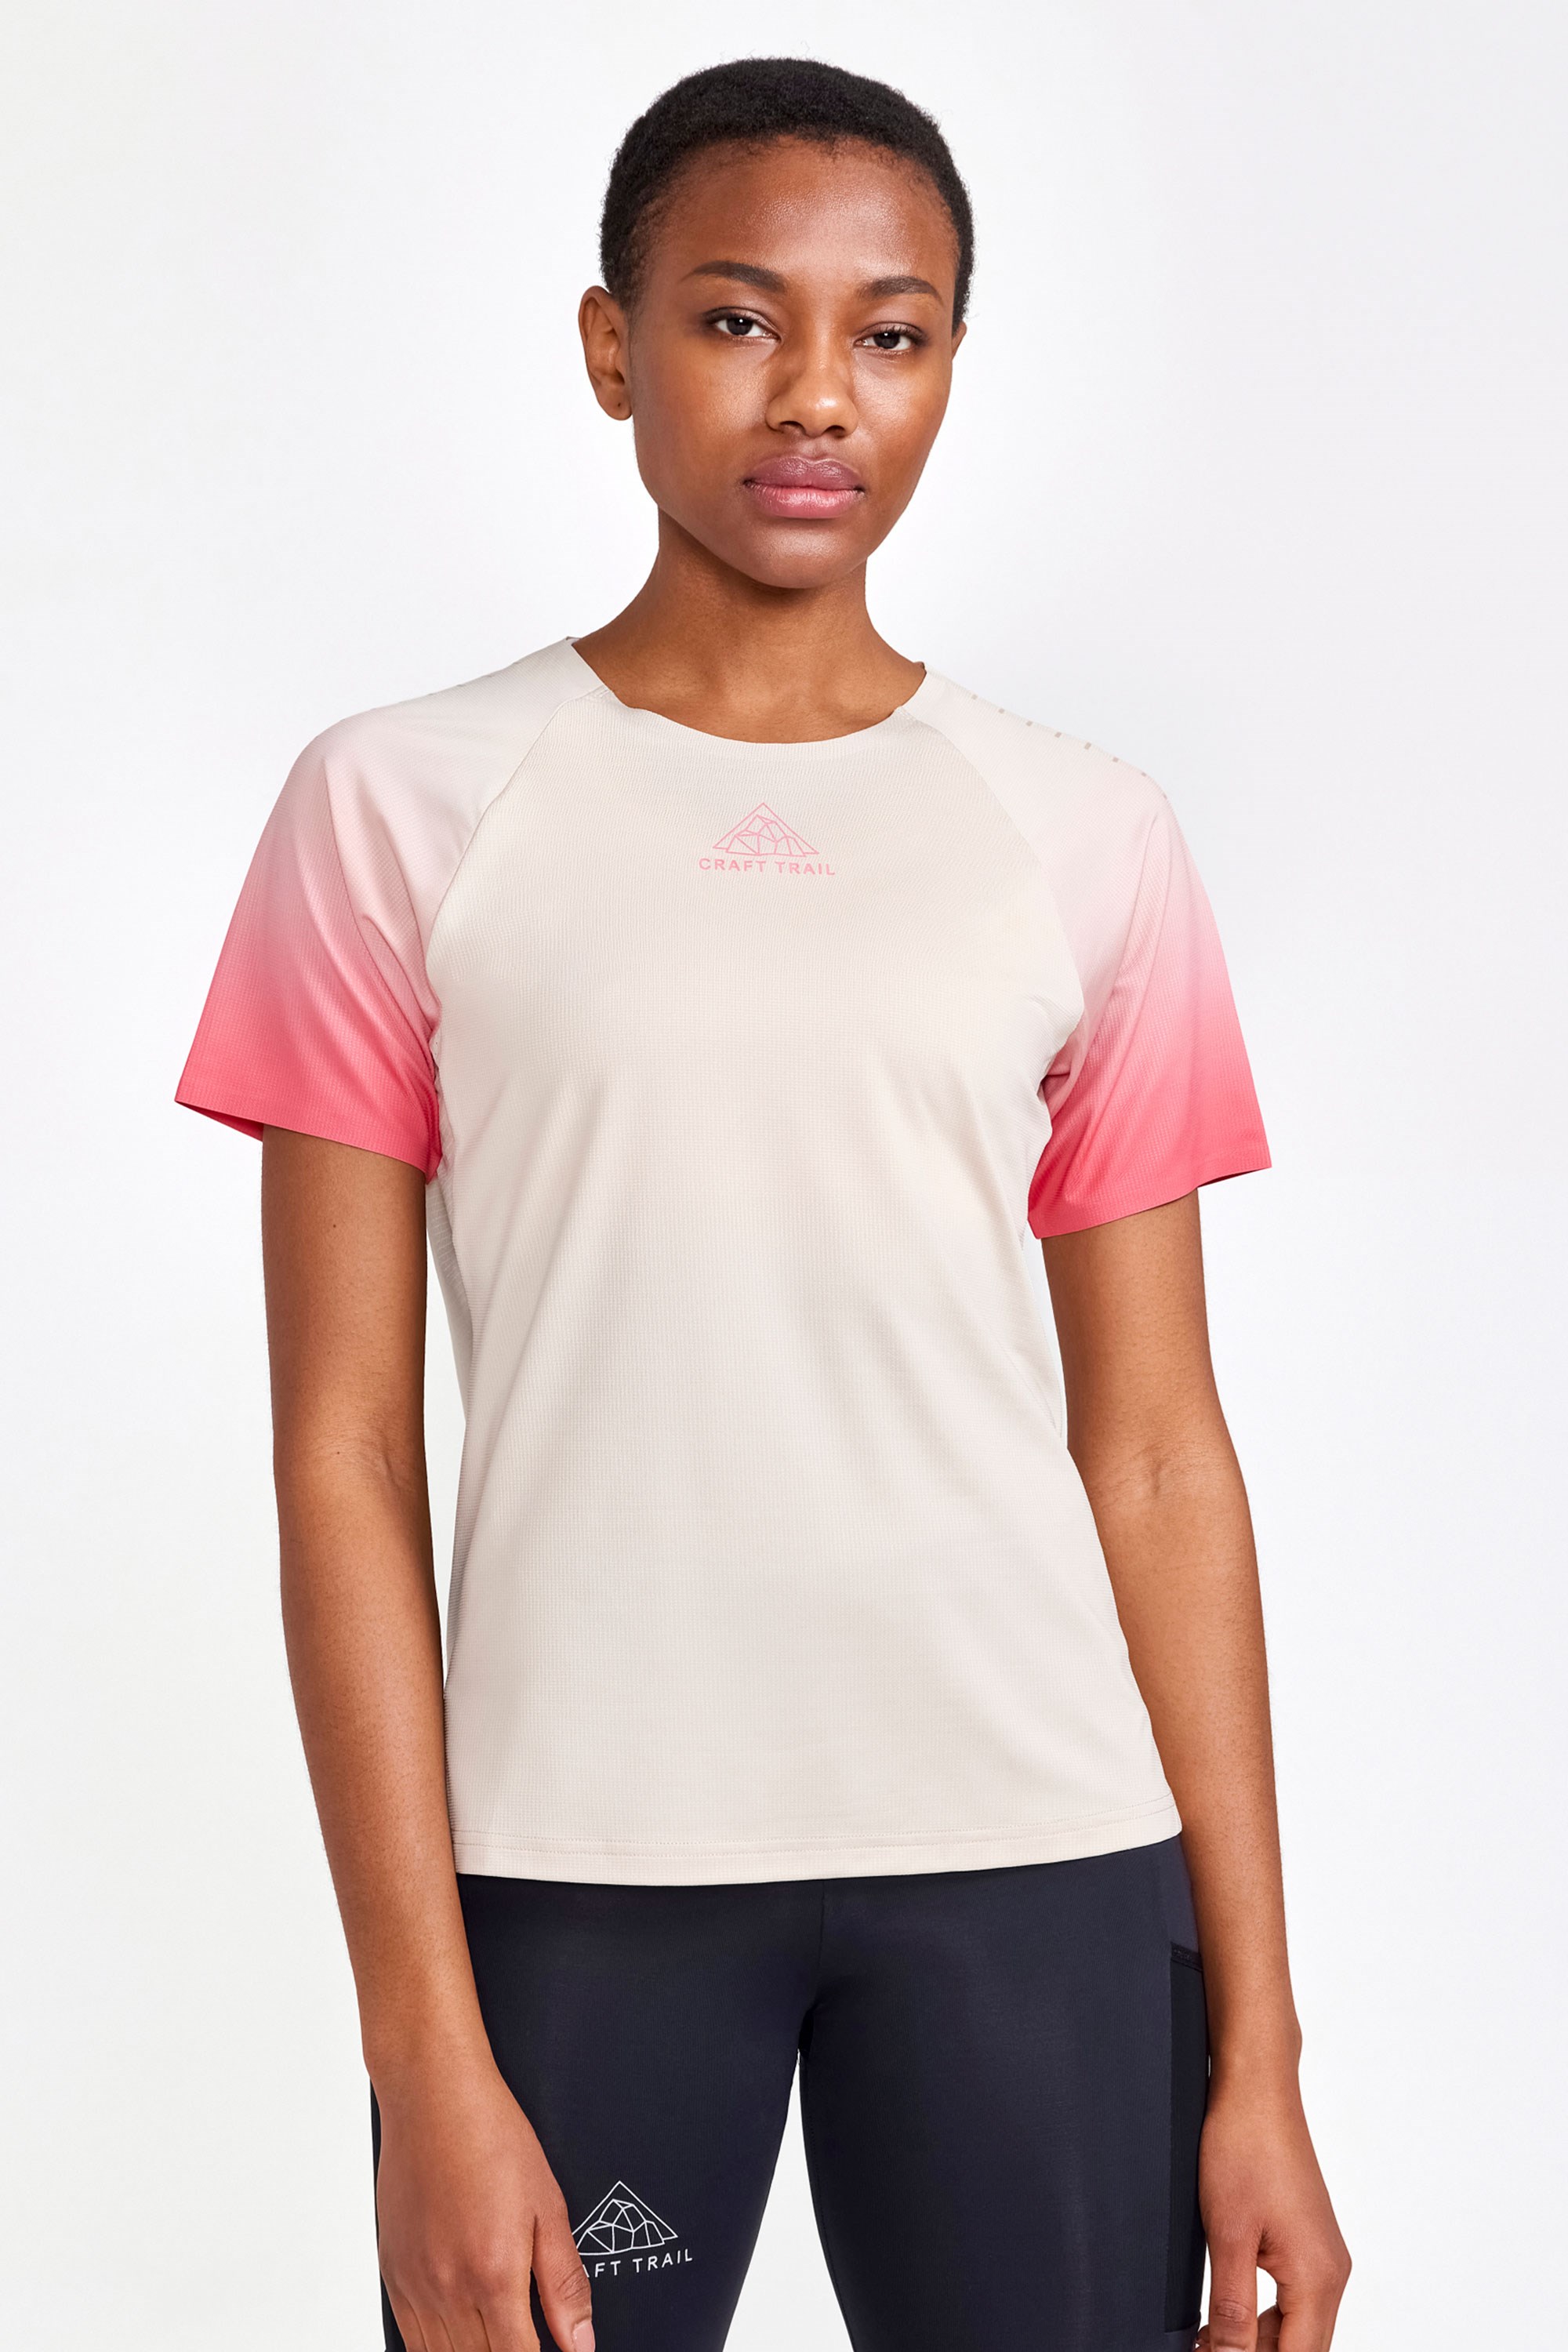 Pro Trail Womens Active Top -